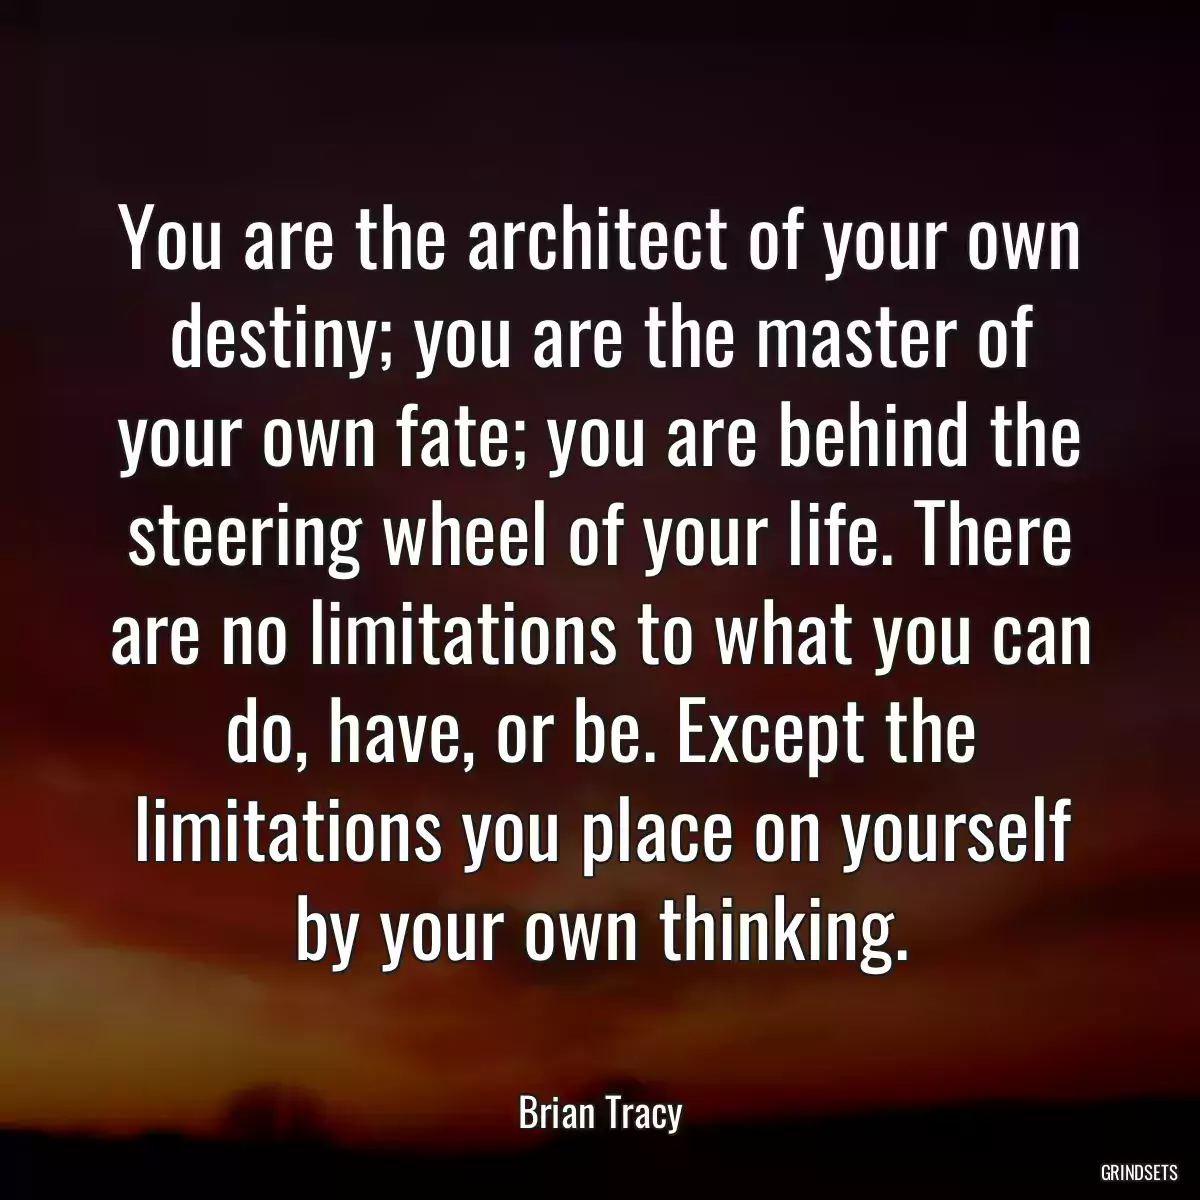 You are the architect of your own destiny; you are the master of your own fate; you are behind the steering wheel of your life. There are no limitations to what you can do, have, or be. Except the limitations you place on yourself by your own thinking.